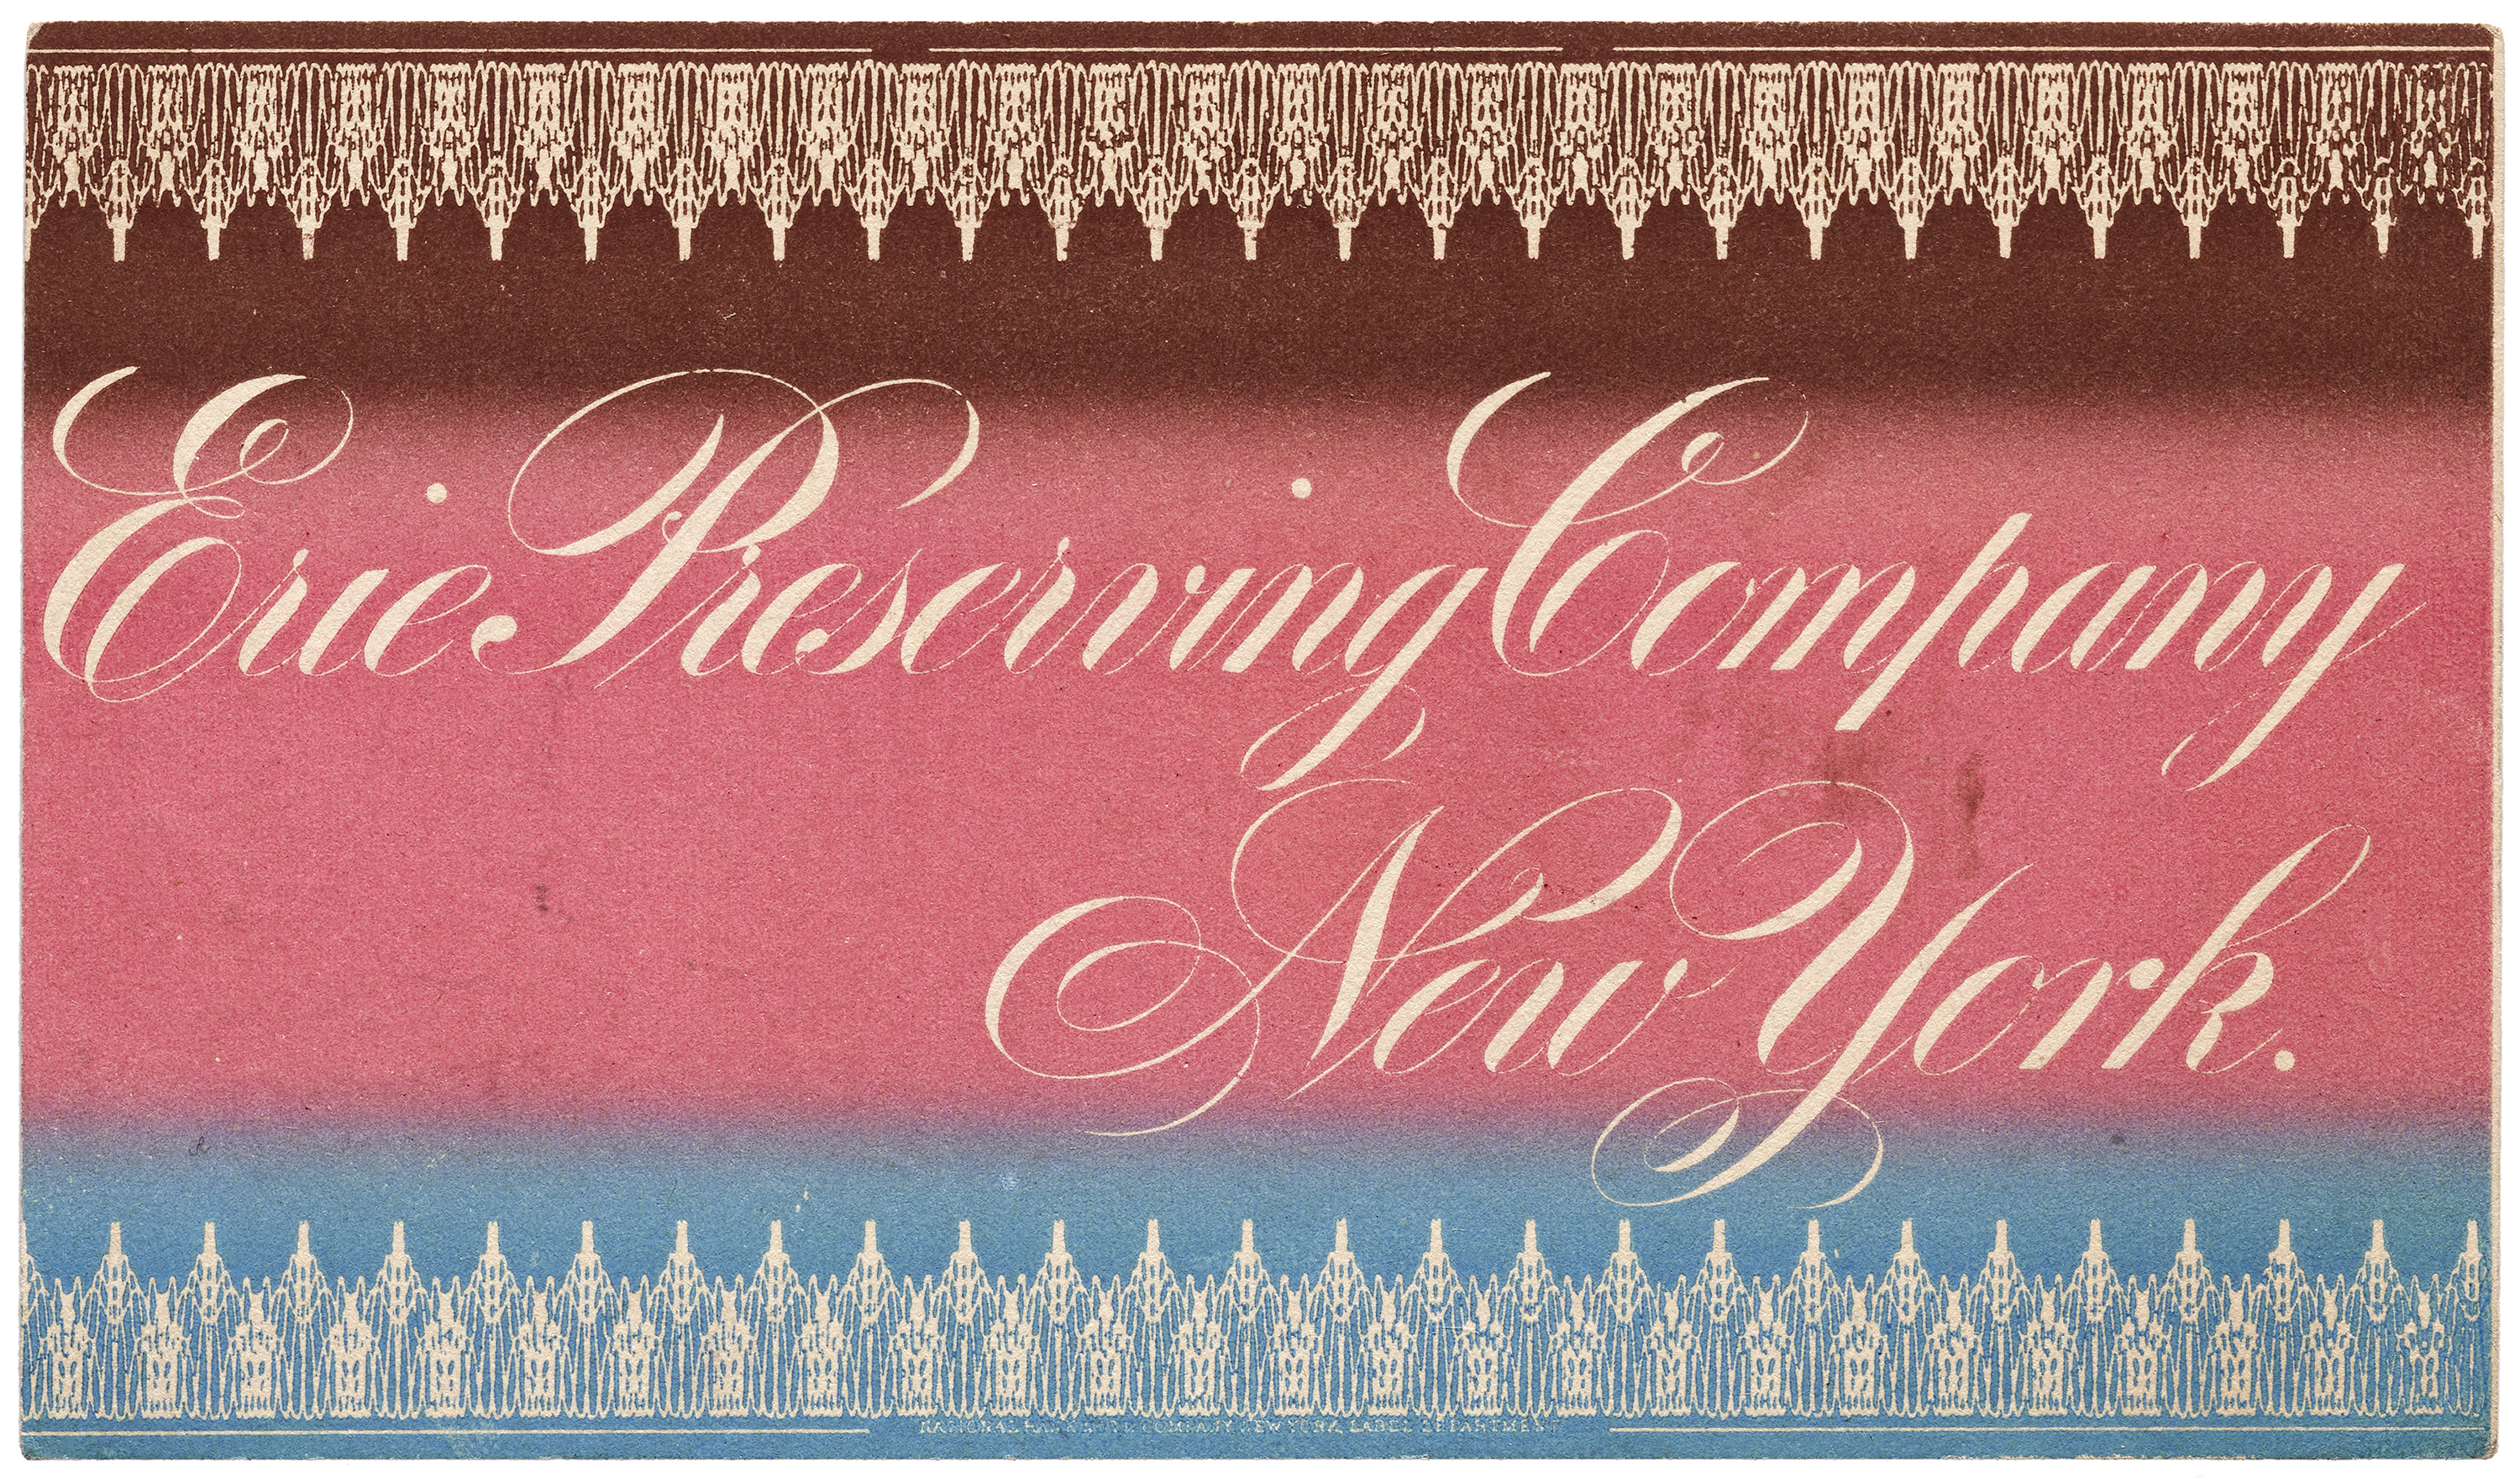 Canning company trade card using split fountain color